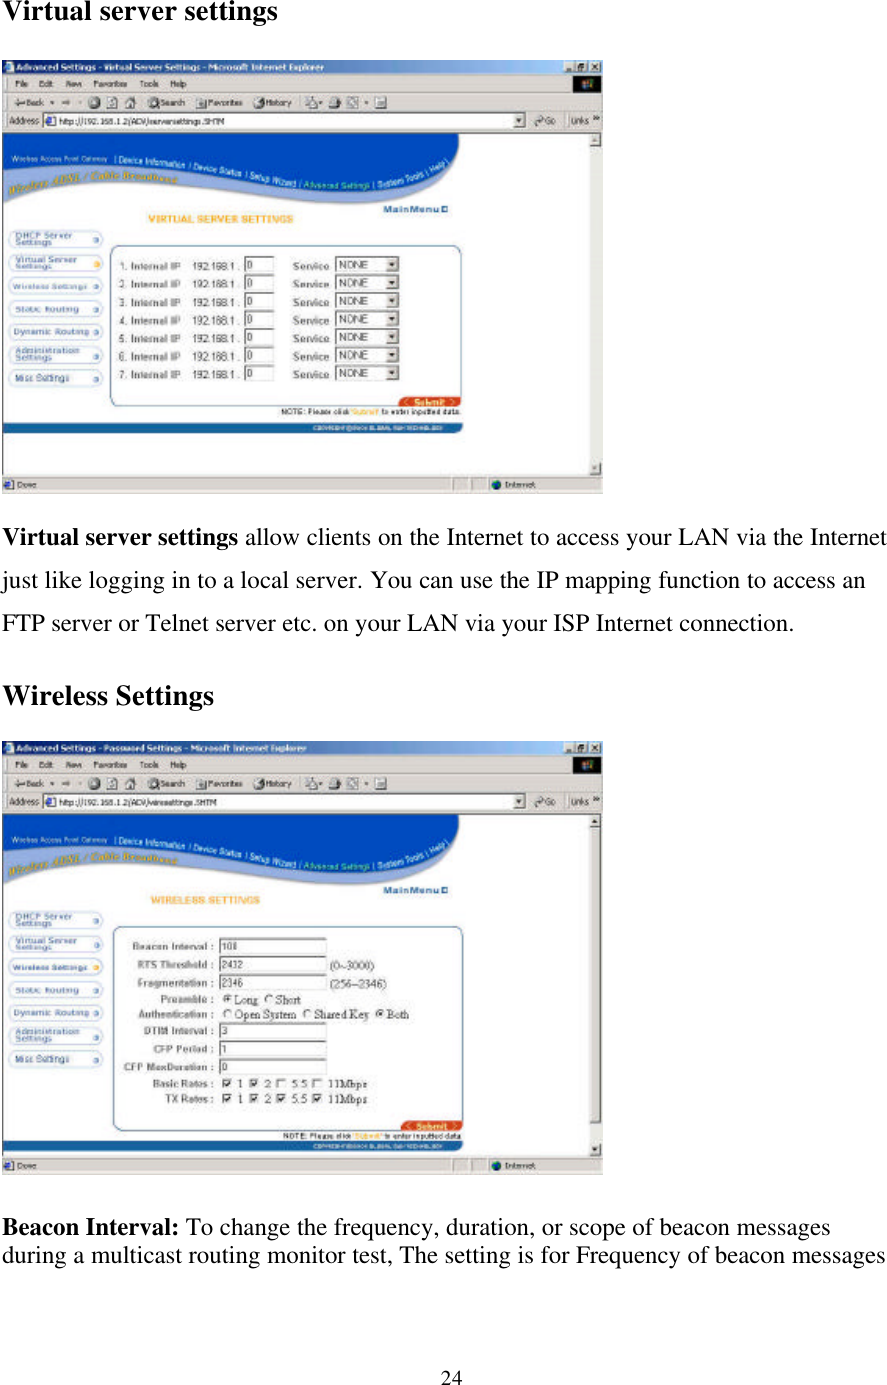 24Virtual server settingsVirtual server settings allow clients on the Internet to access your LAN via the Internetjust like logging in to a local server. You can use the IP mapping function to access anFTP server or Telnet server etc. on your LAN via your ISP Internet connection.Wireless SettingsBeacon Interval: To change the frequency, duration, or scope of beacon messagesduring a multicast routing monitor test, The setting is for Frequency of beacon messages